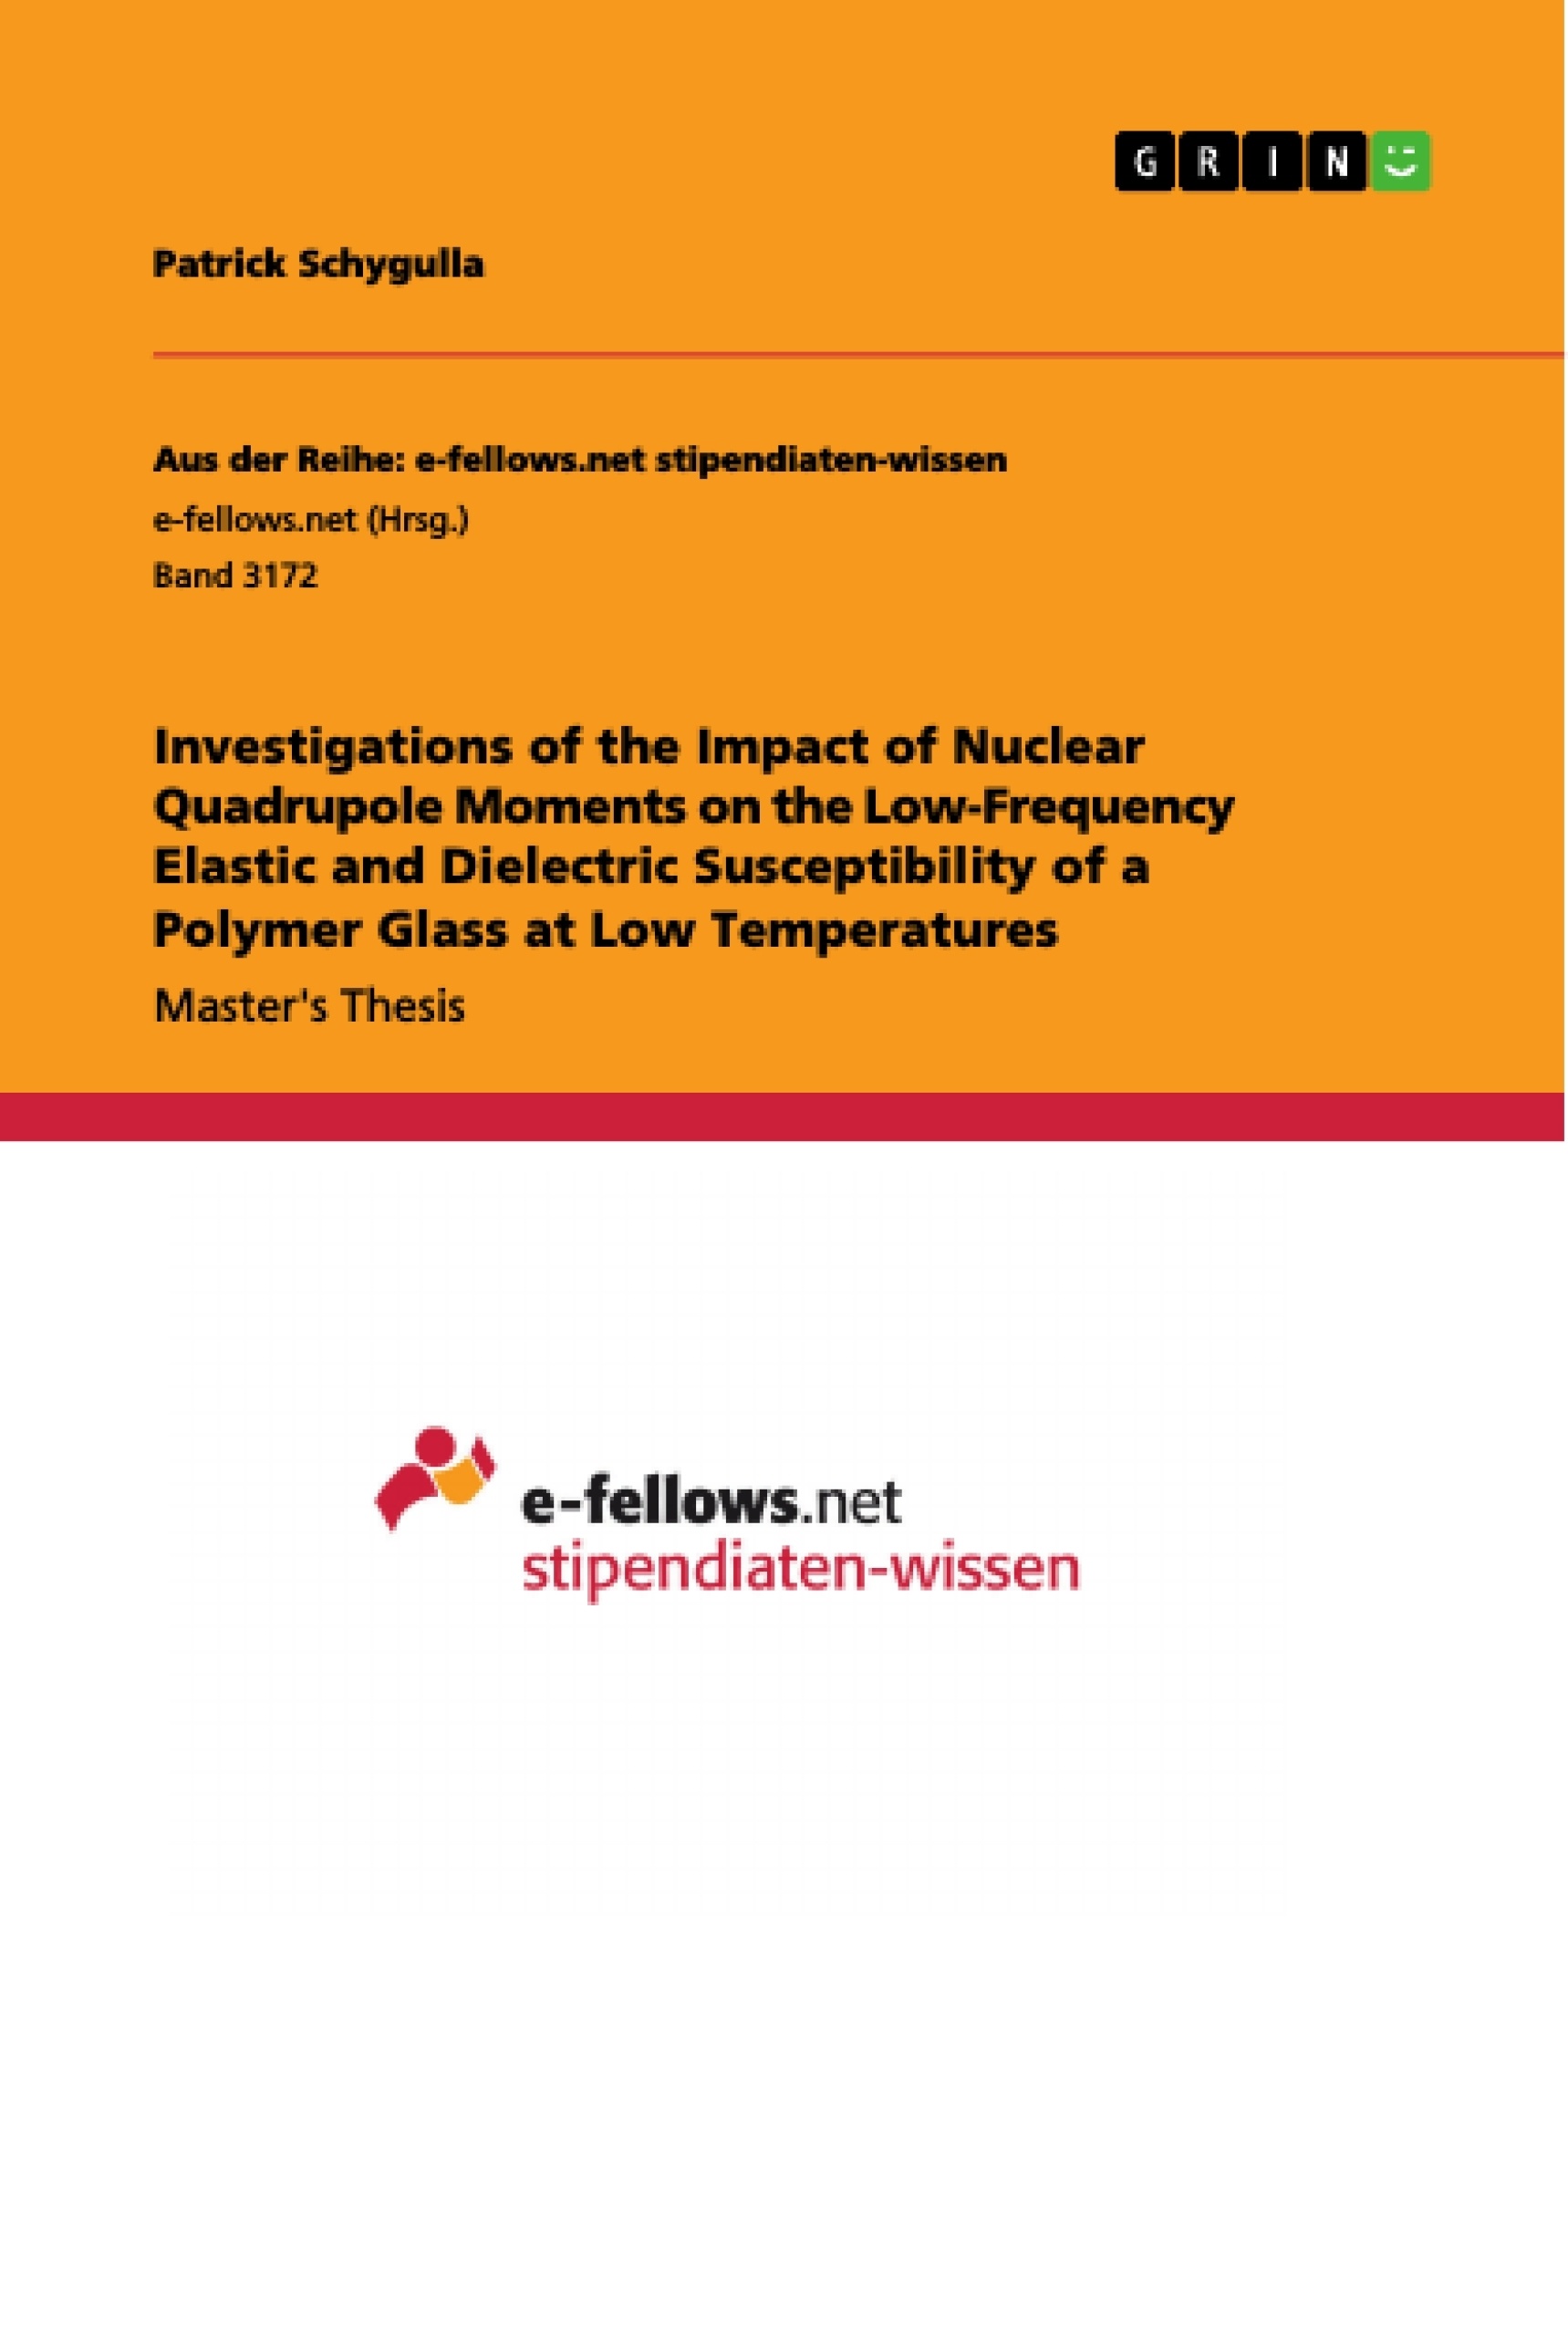 Titel: Investigations of the Impact of Nuclear Quadrupole Moments on the Low-Frequency Elastic and Dielectric Susceptibility of a Polymer Glass at Low Temperatures